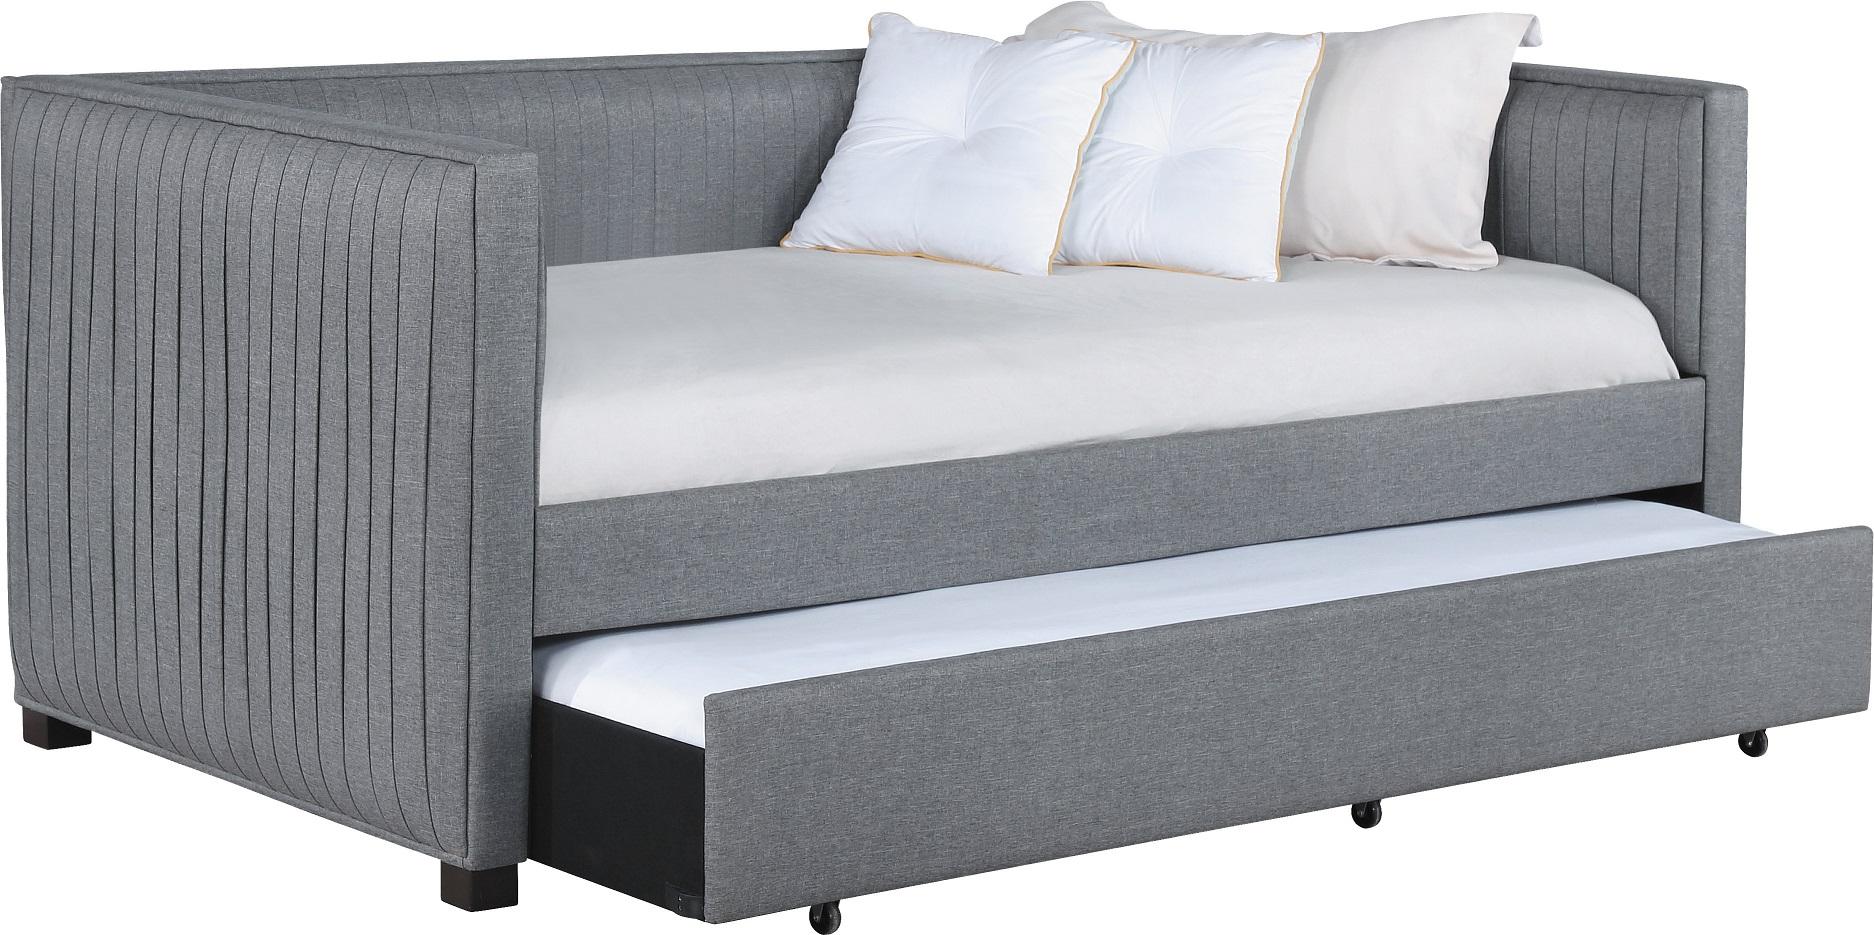 Modern Daybed w/Trundle 300554 Brodie 300554 in Gray Fabric